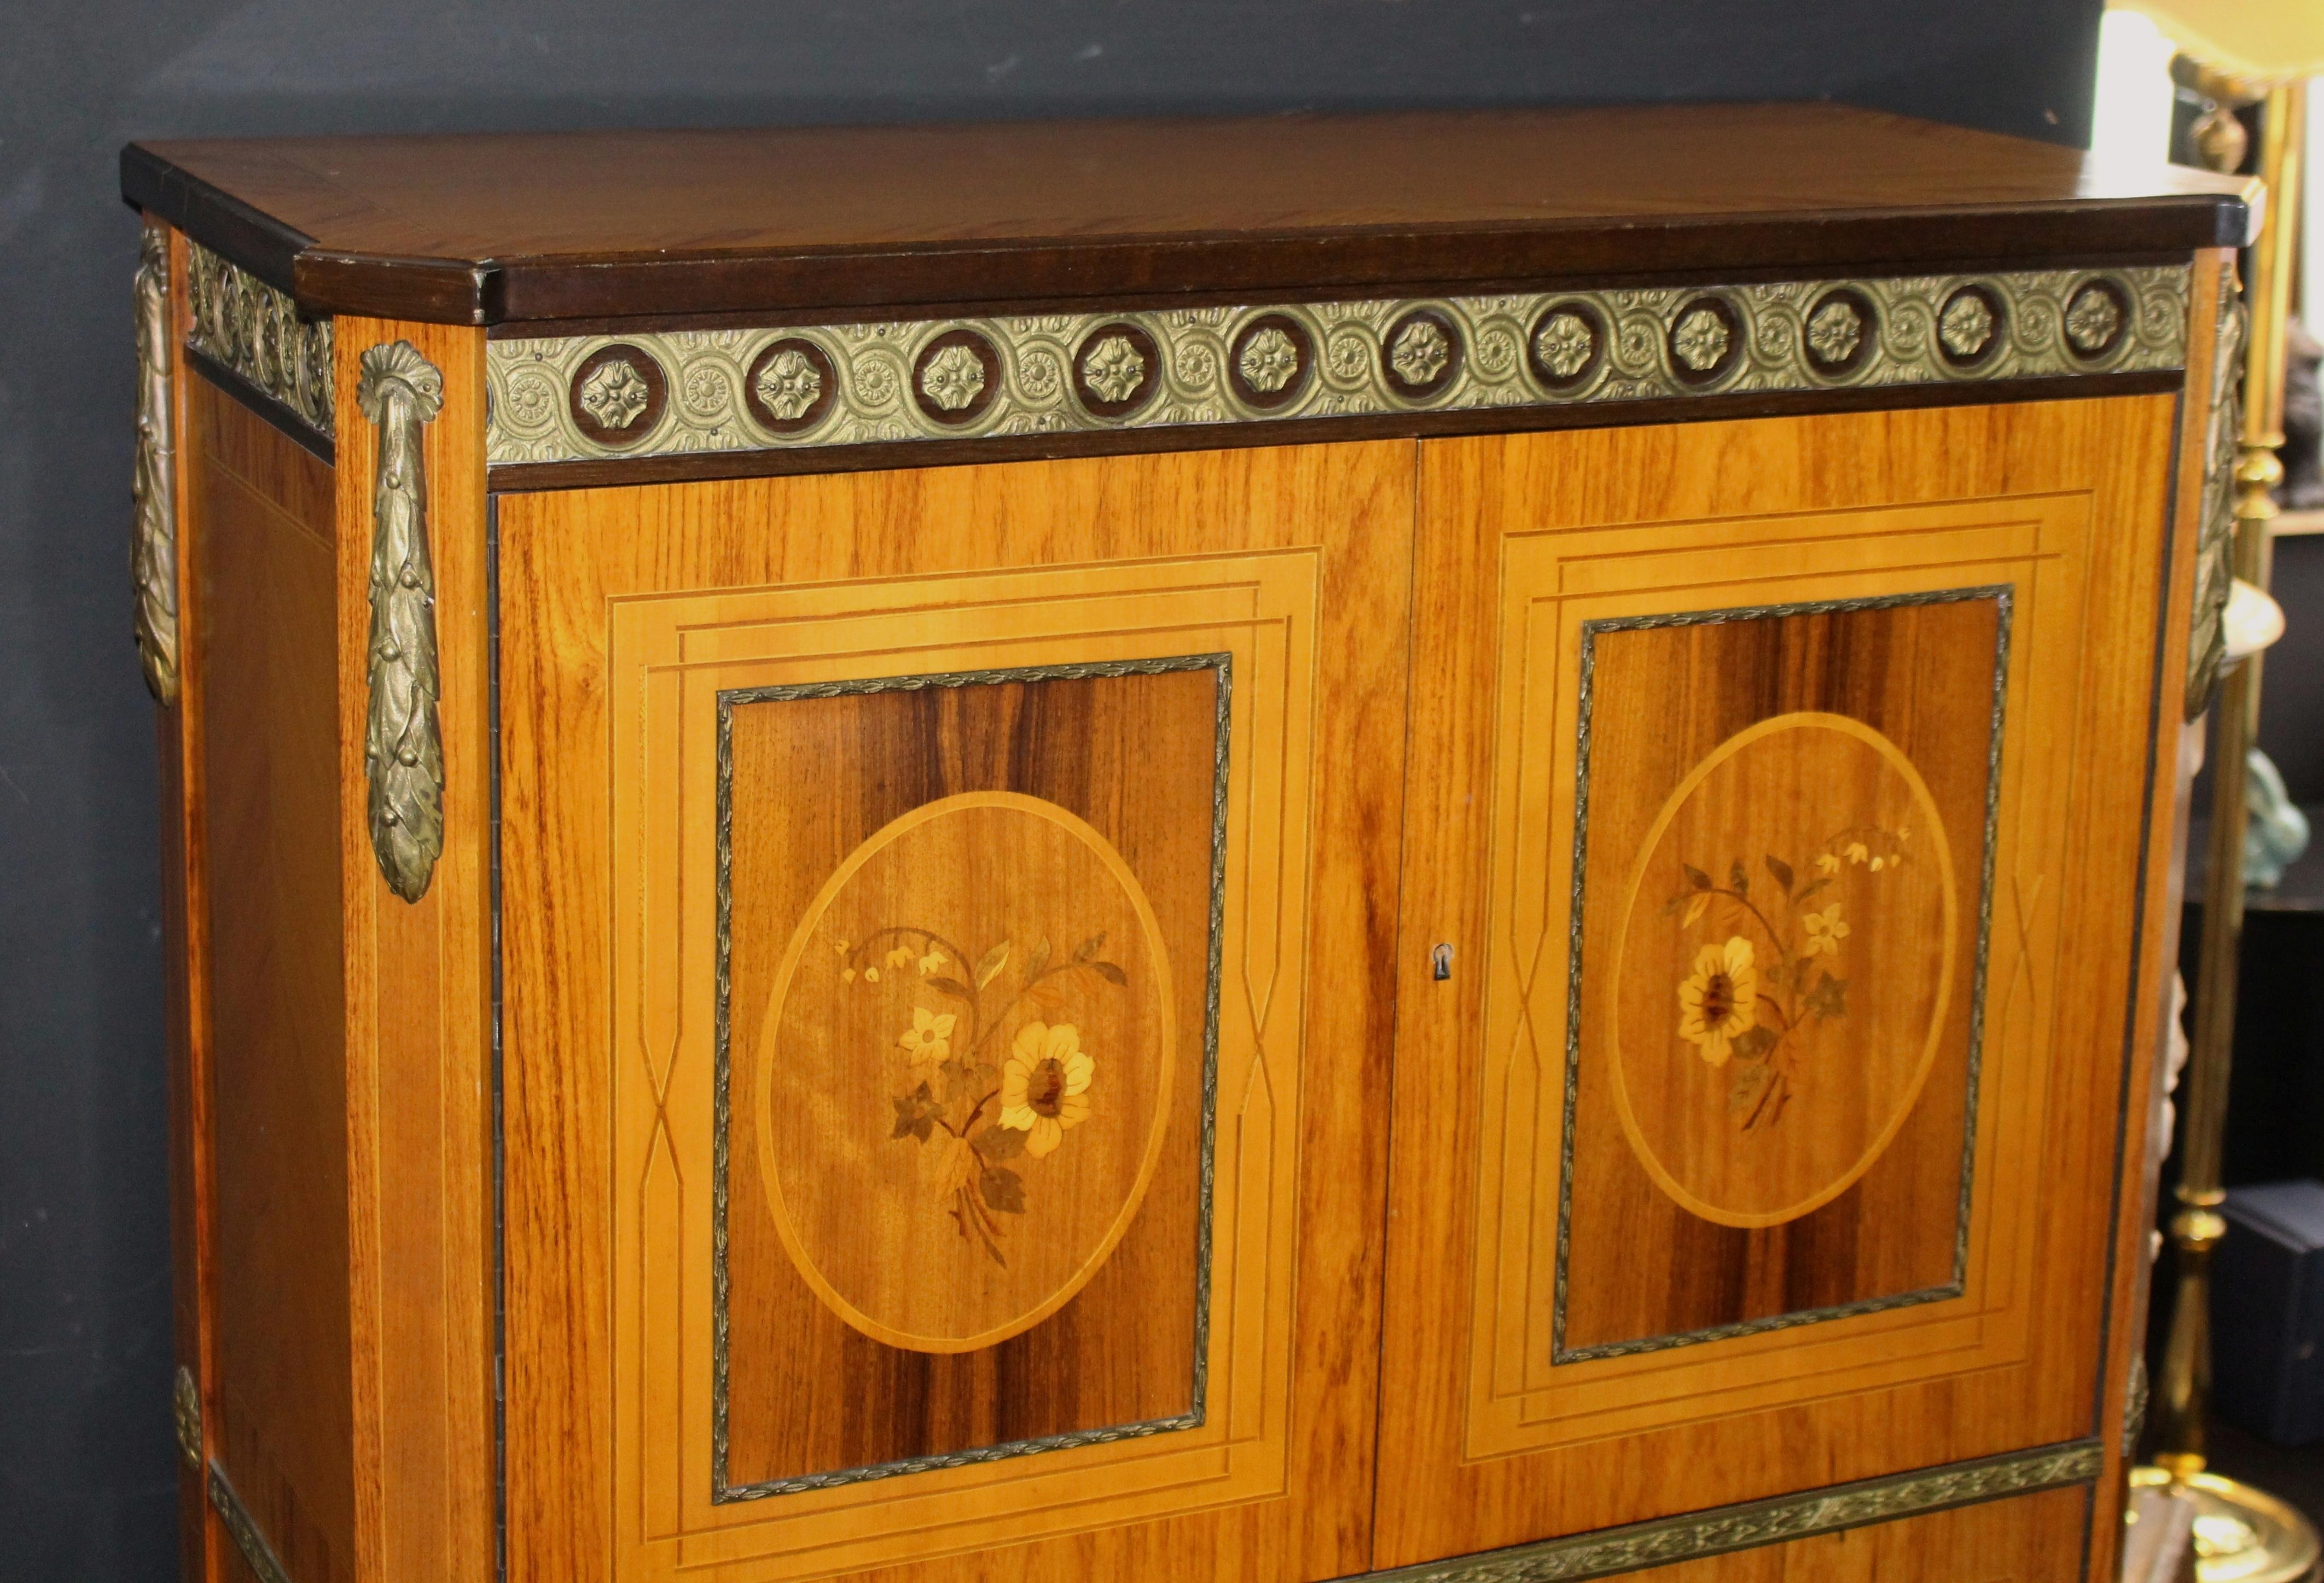 Measures: Width 89 cm 35 in
Depth 38.5 cm 15 1/4 in
Height 140 cm 55 in





Cocktail cabinet
Style French Empire style, late 20th century.
Decoration heavy inlaid with ormolu mounts
Condition very good condition commensurate with age.